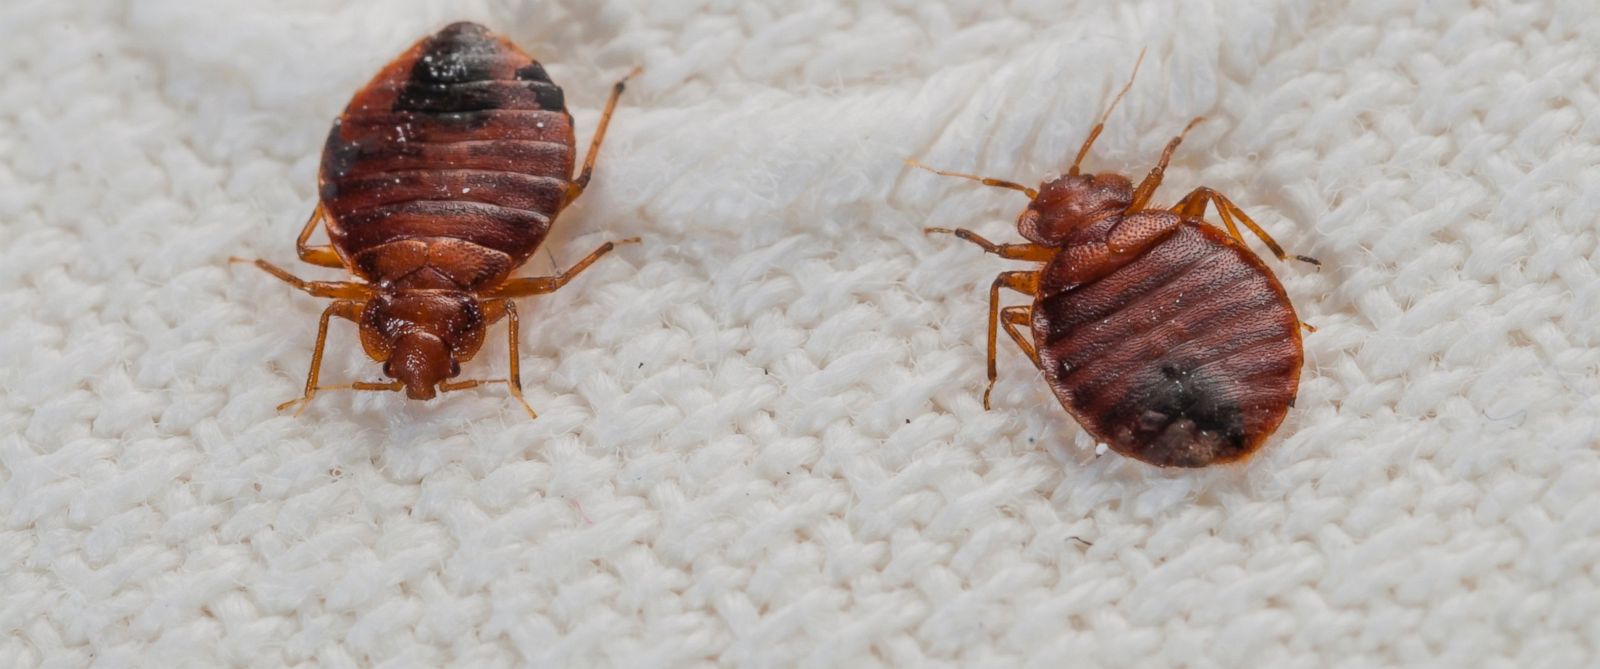 What are some pesticides that help control bed bugs?